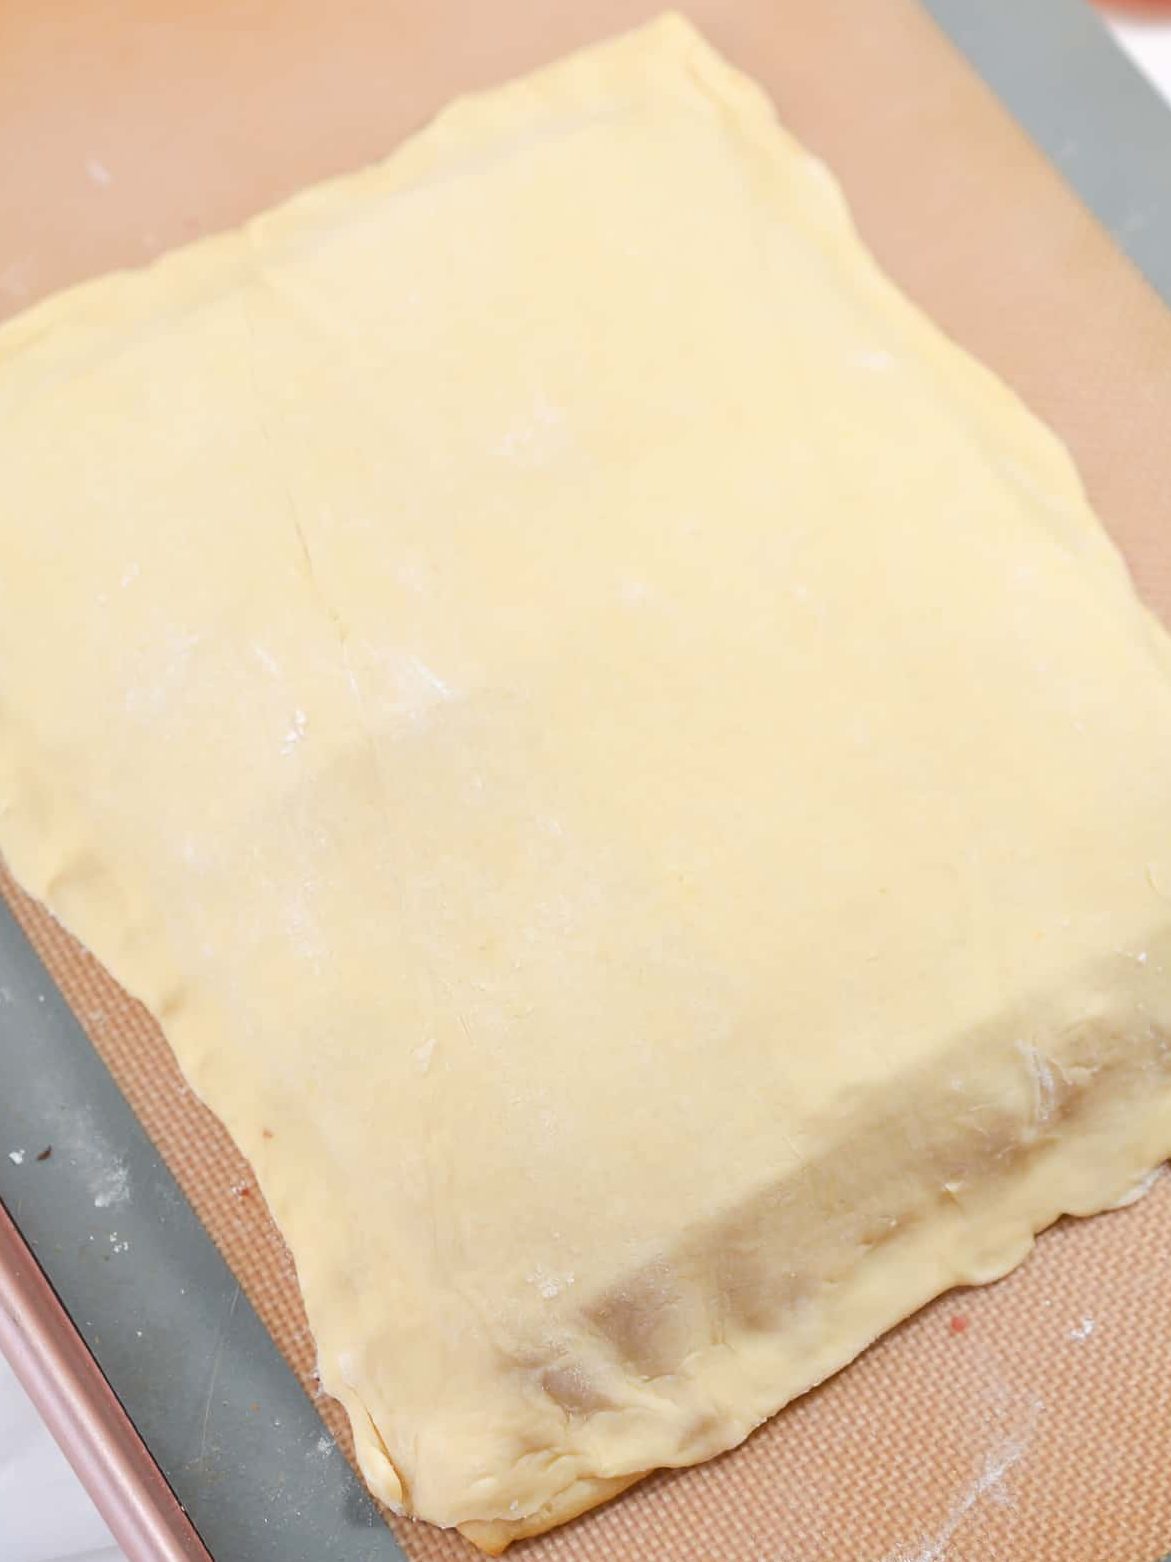 Roll out the other half of the dough, and spread it over the mixture, pinching the edges closed around the bottom.